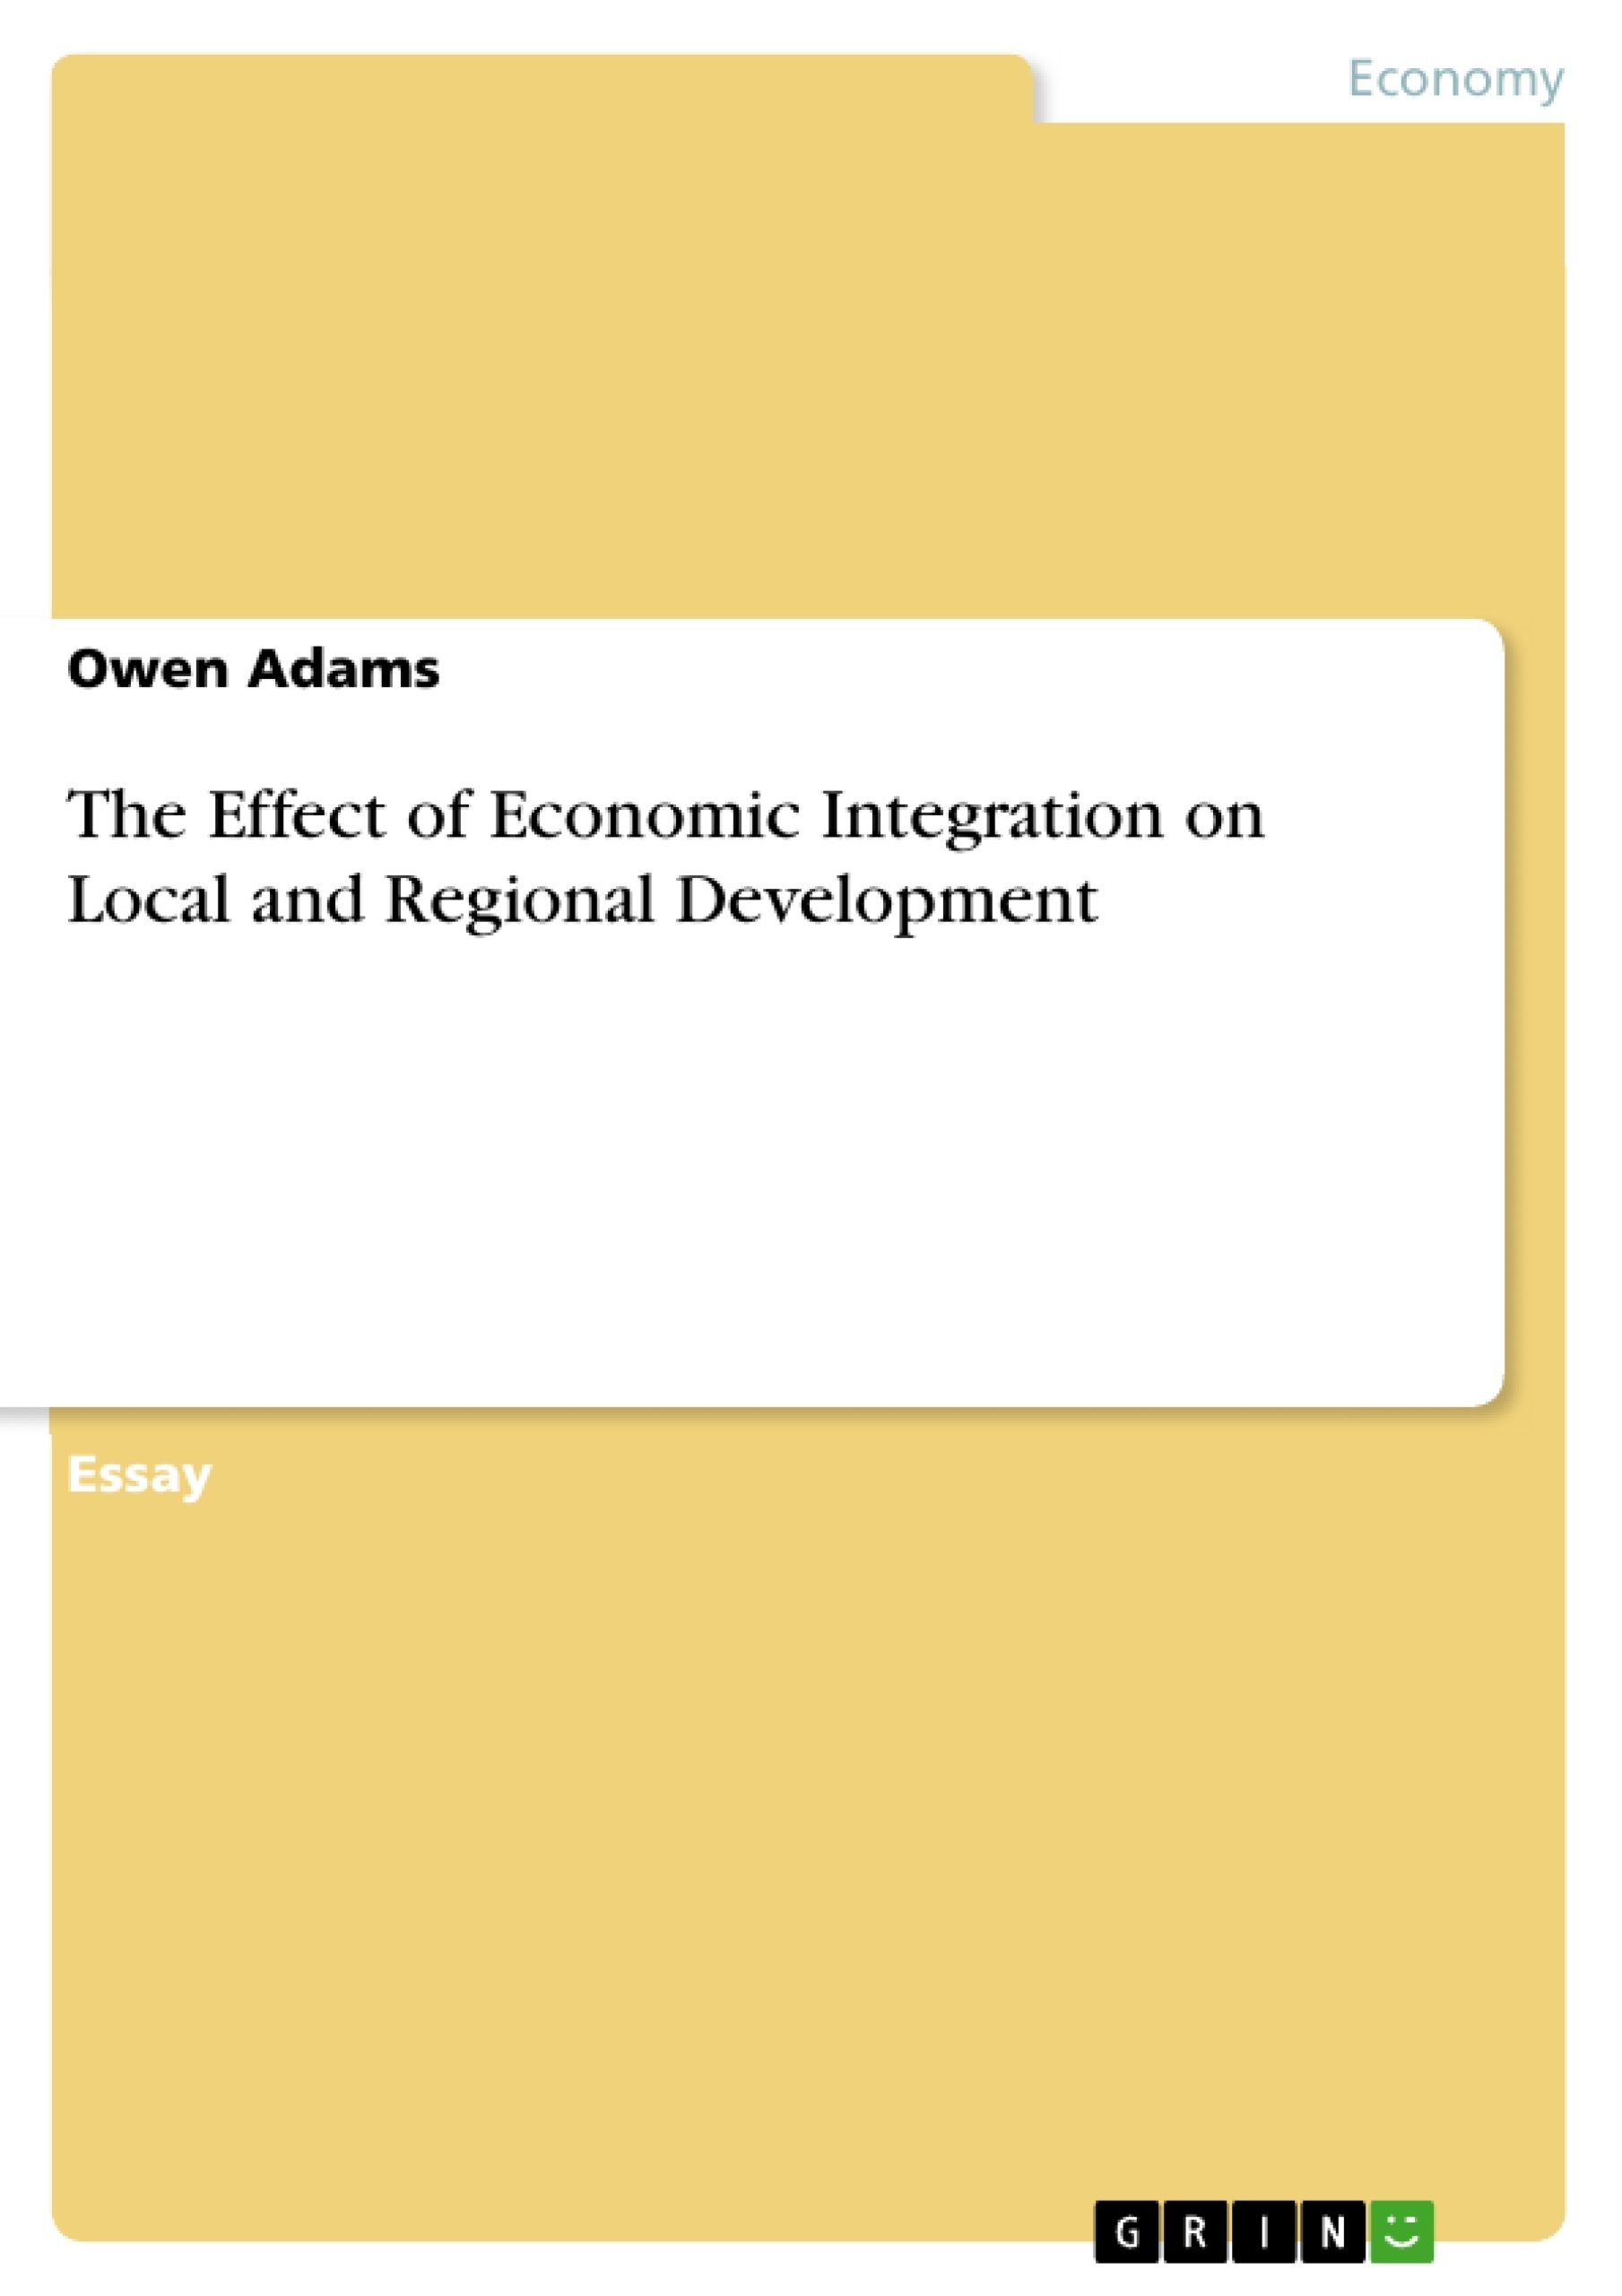 Title: The Effect of Economic Integration on Local and Regional Development